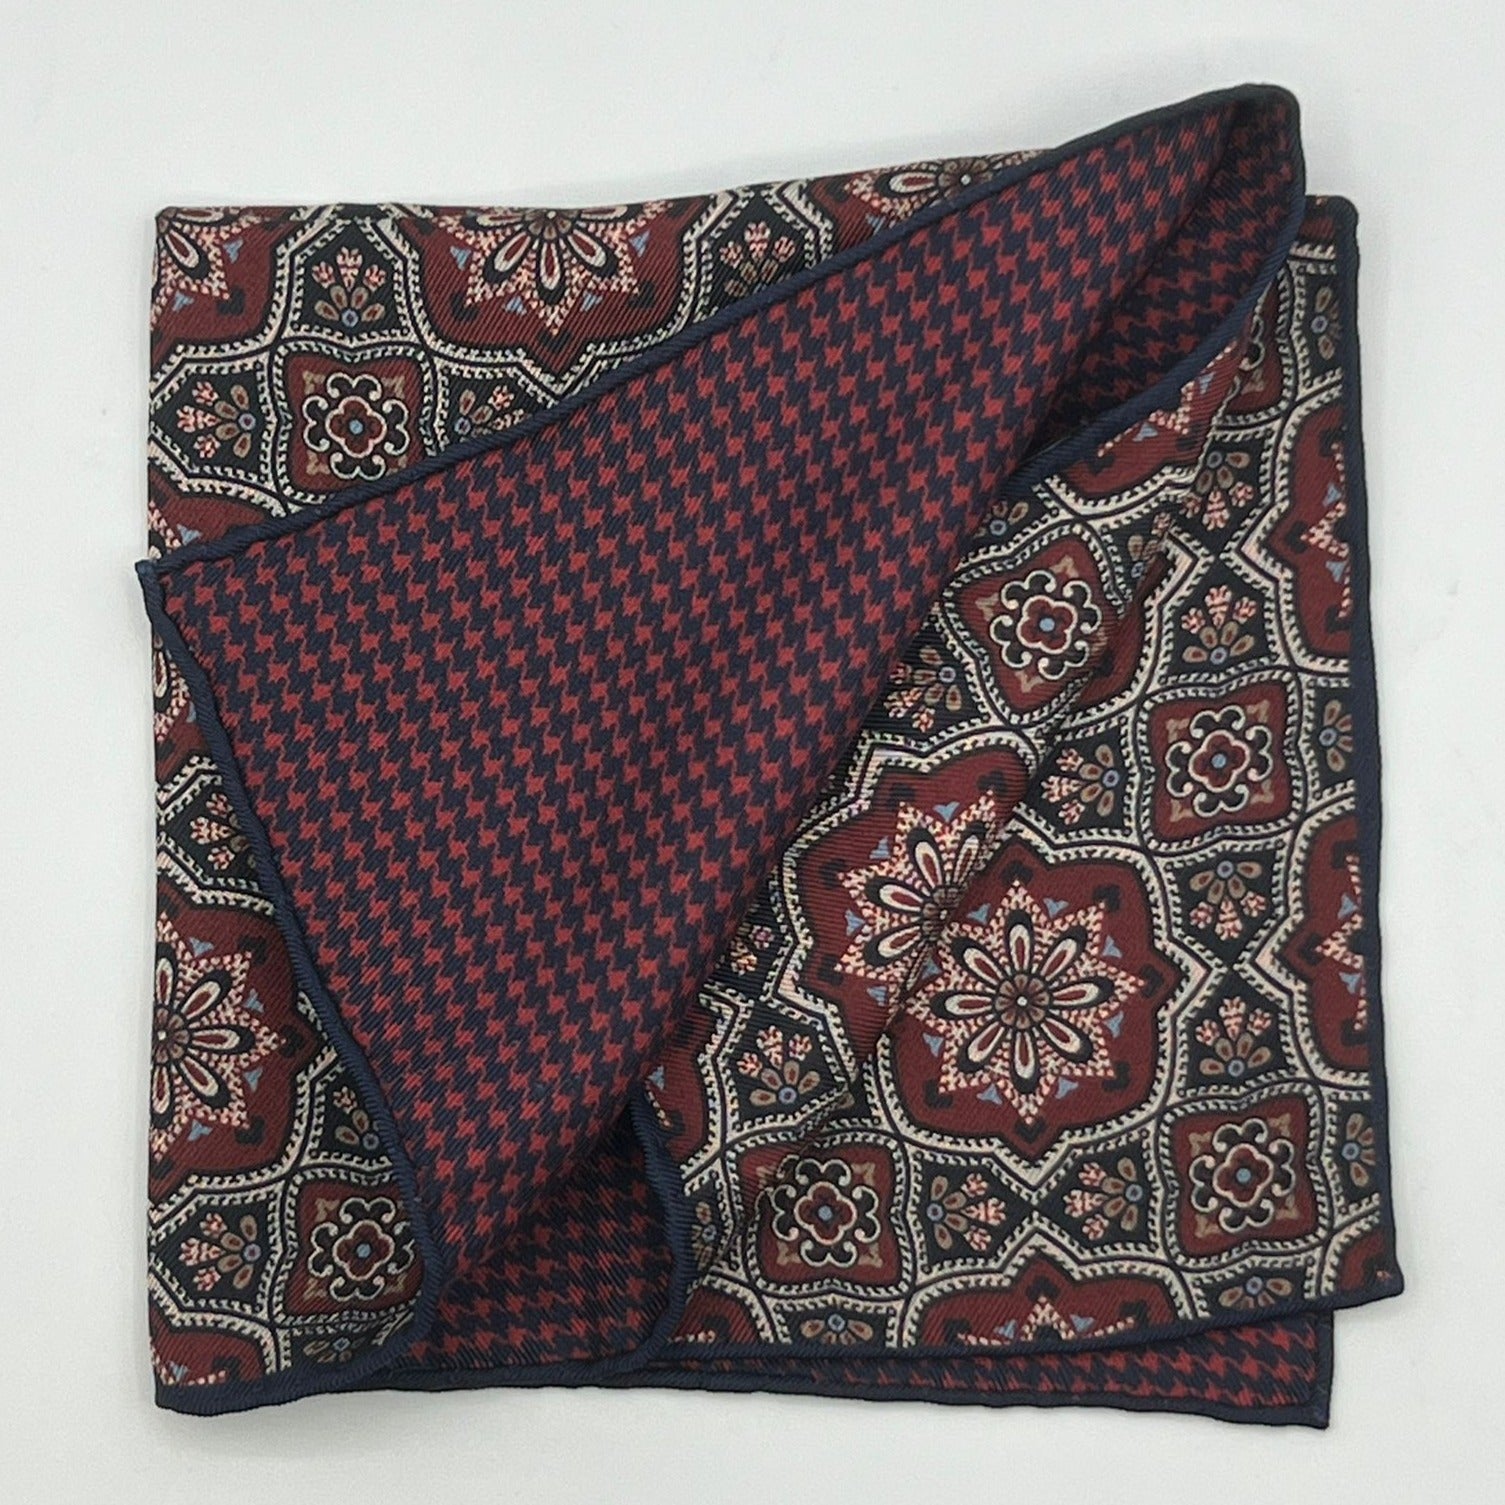 Holliday & Brown Hand-rolled   Holliday & Brown for Cruciani & Bella 100% Silk Light Brown, Blue, Red and Off White  Double Faces Patterned  Motif  Pocket Square Handmade in Italy 32 cm X 32 cm